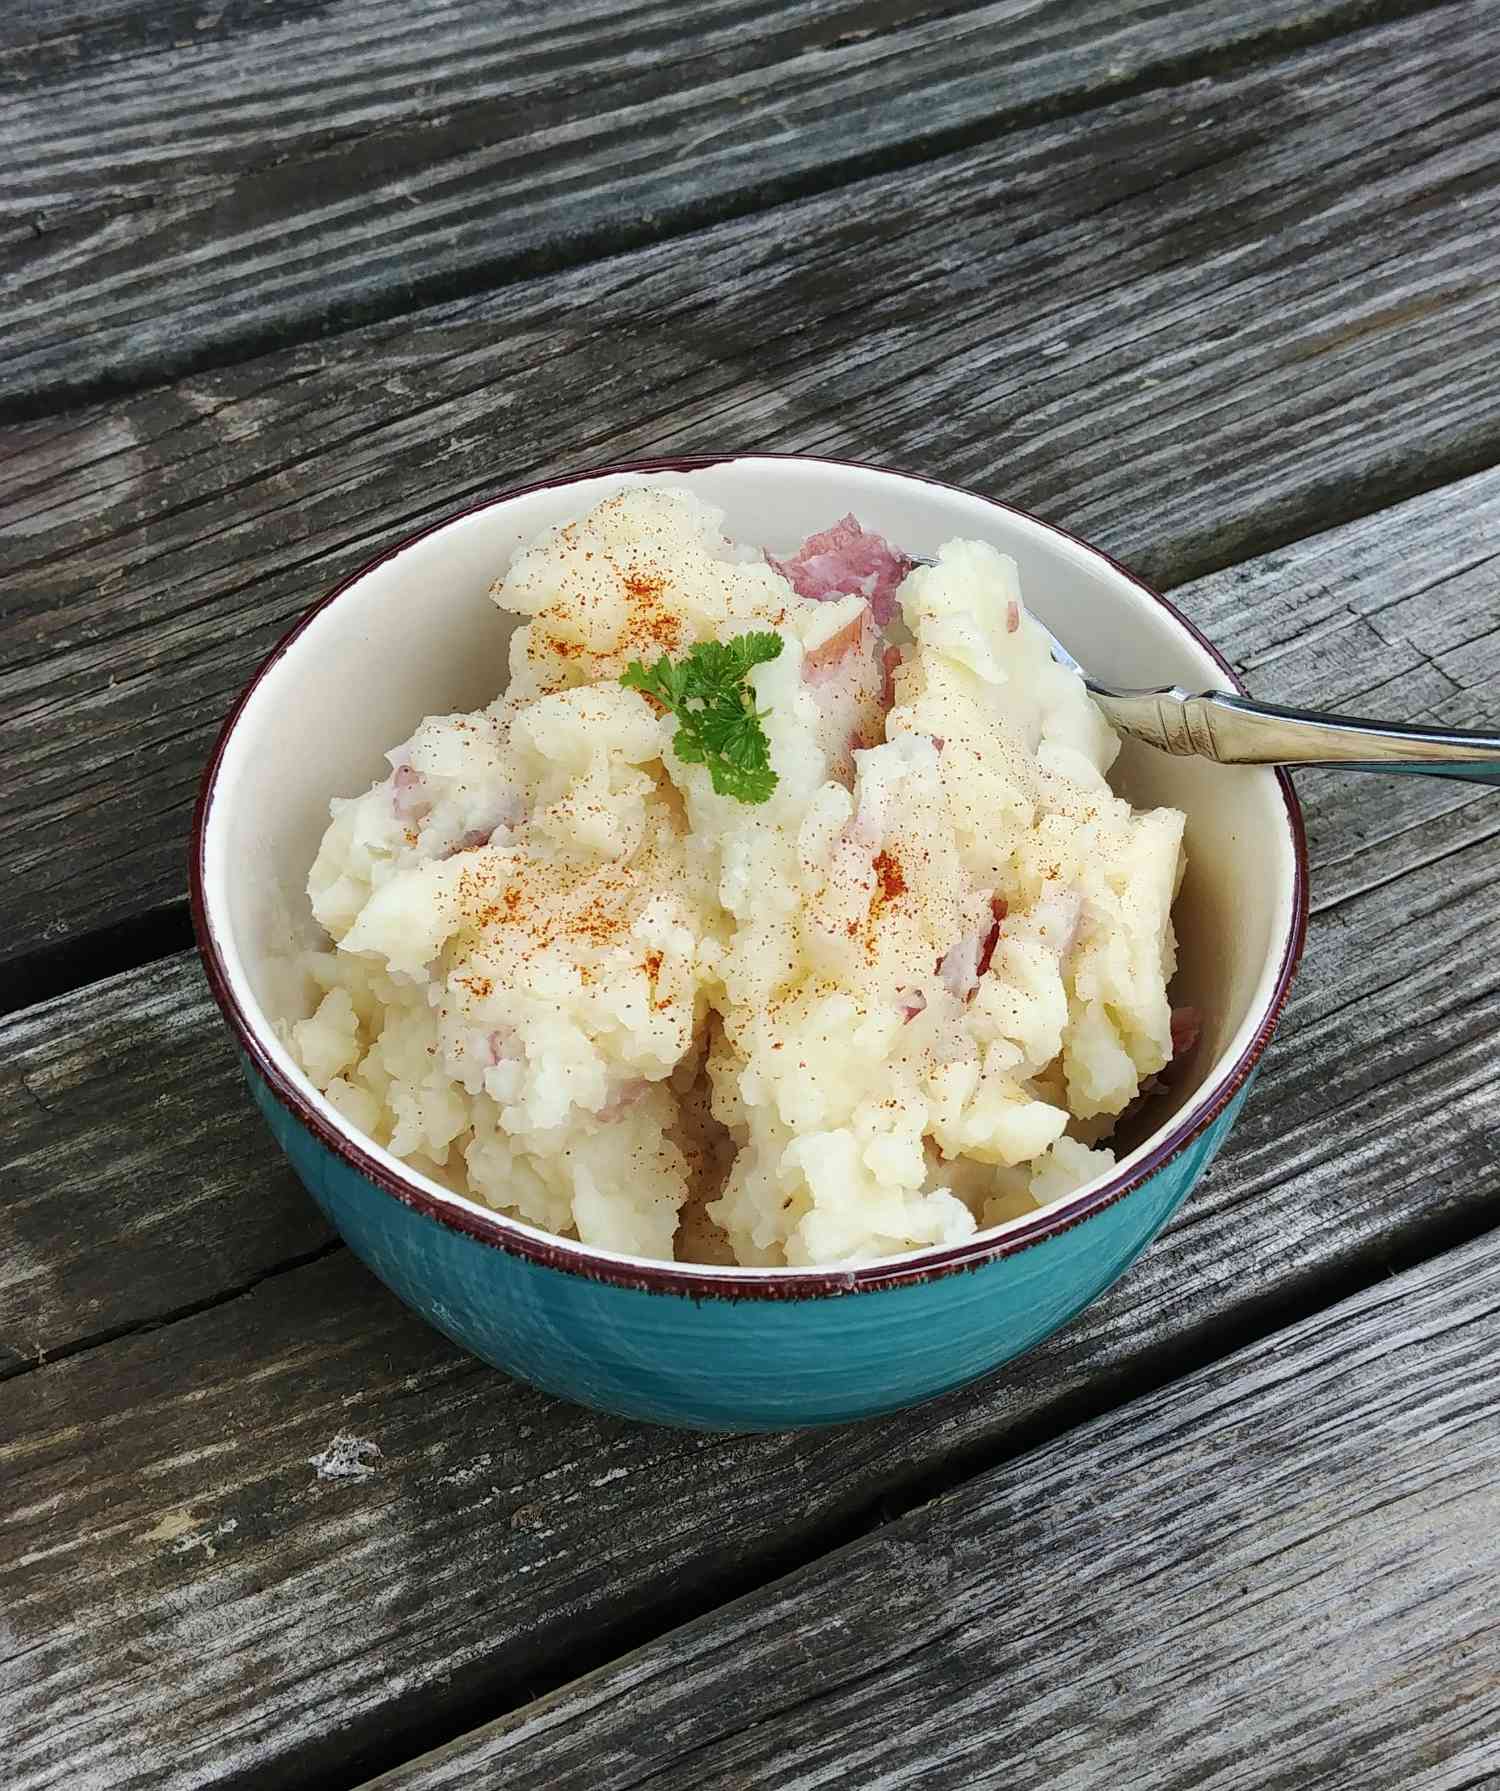 mashed potatoes with parsley and seasoning in ceramic bowl on wooden table